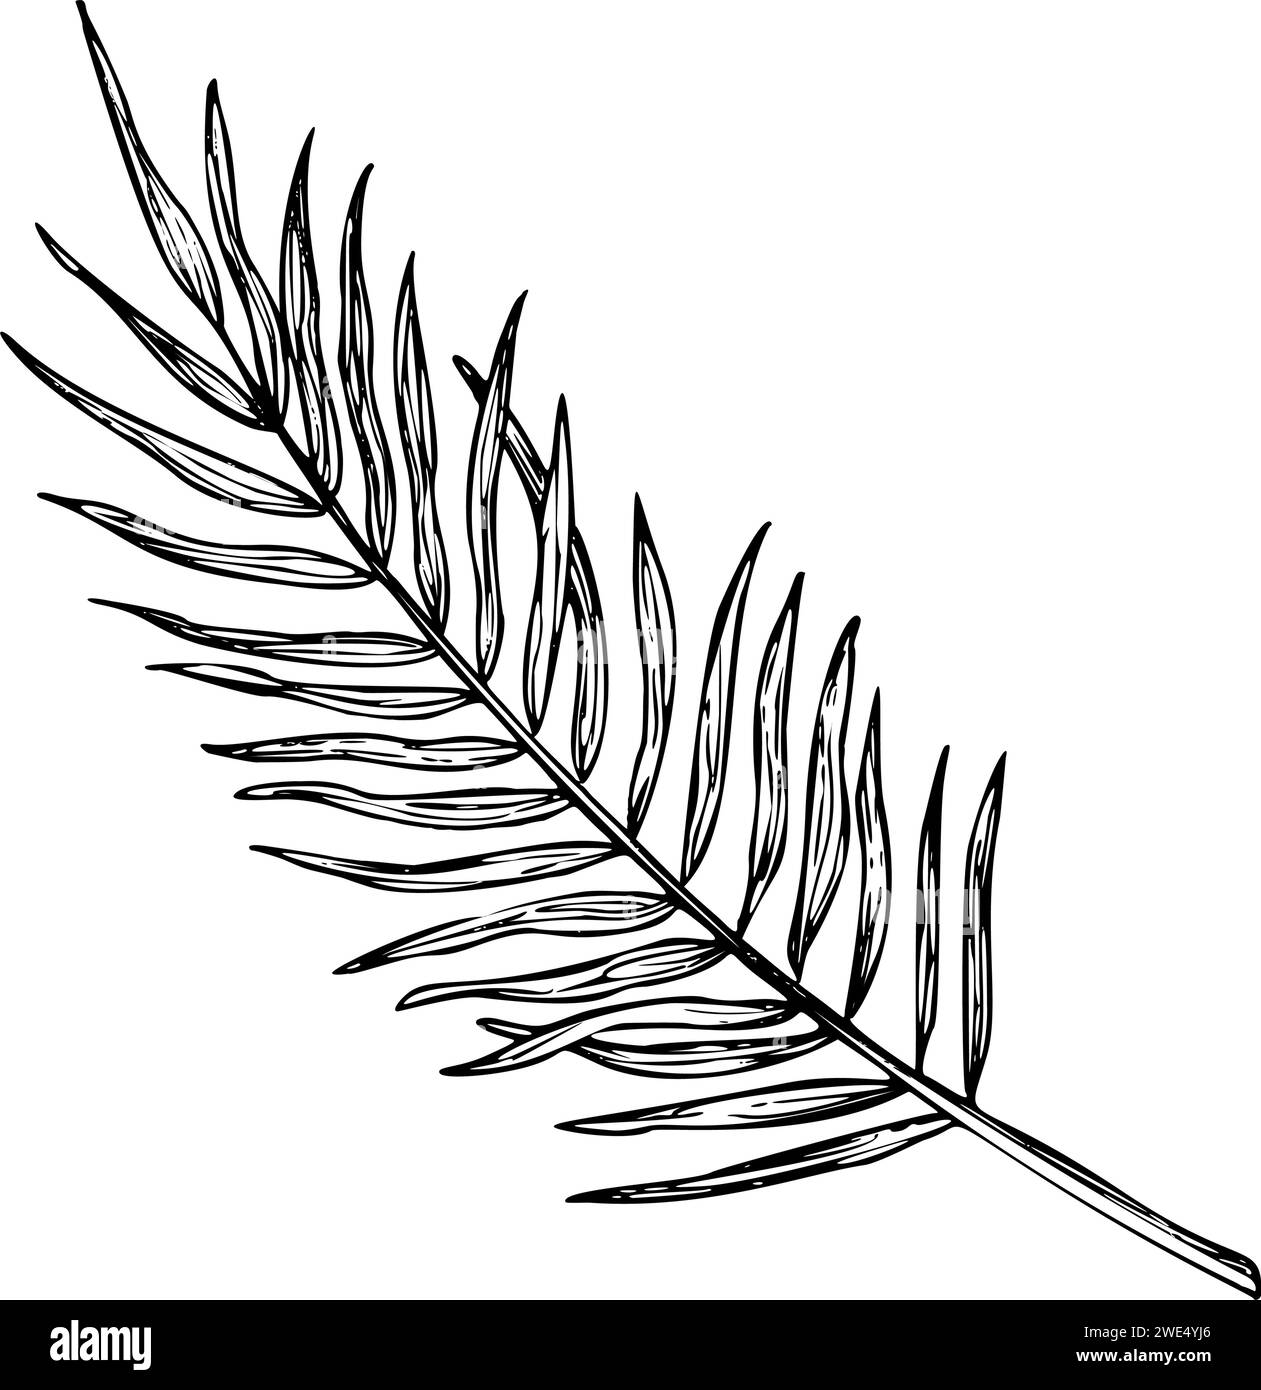 Palm Leaf vector illustration. Hand drawn branch of jungle tropical tree in linear style on isolated background. Engraved sketch of rainforest foliage for icon or logo. Botanical painting of plant. Stock Vector